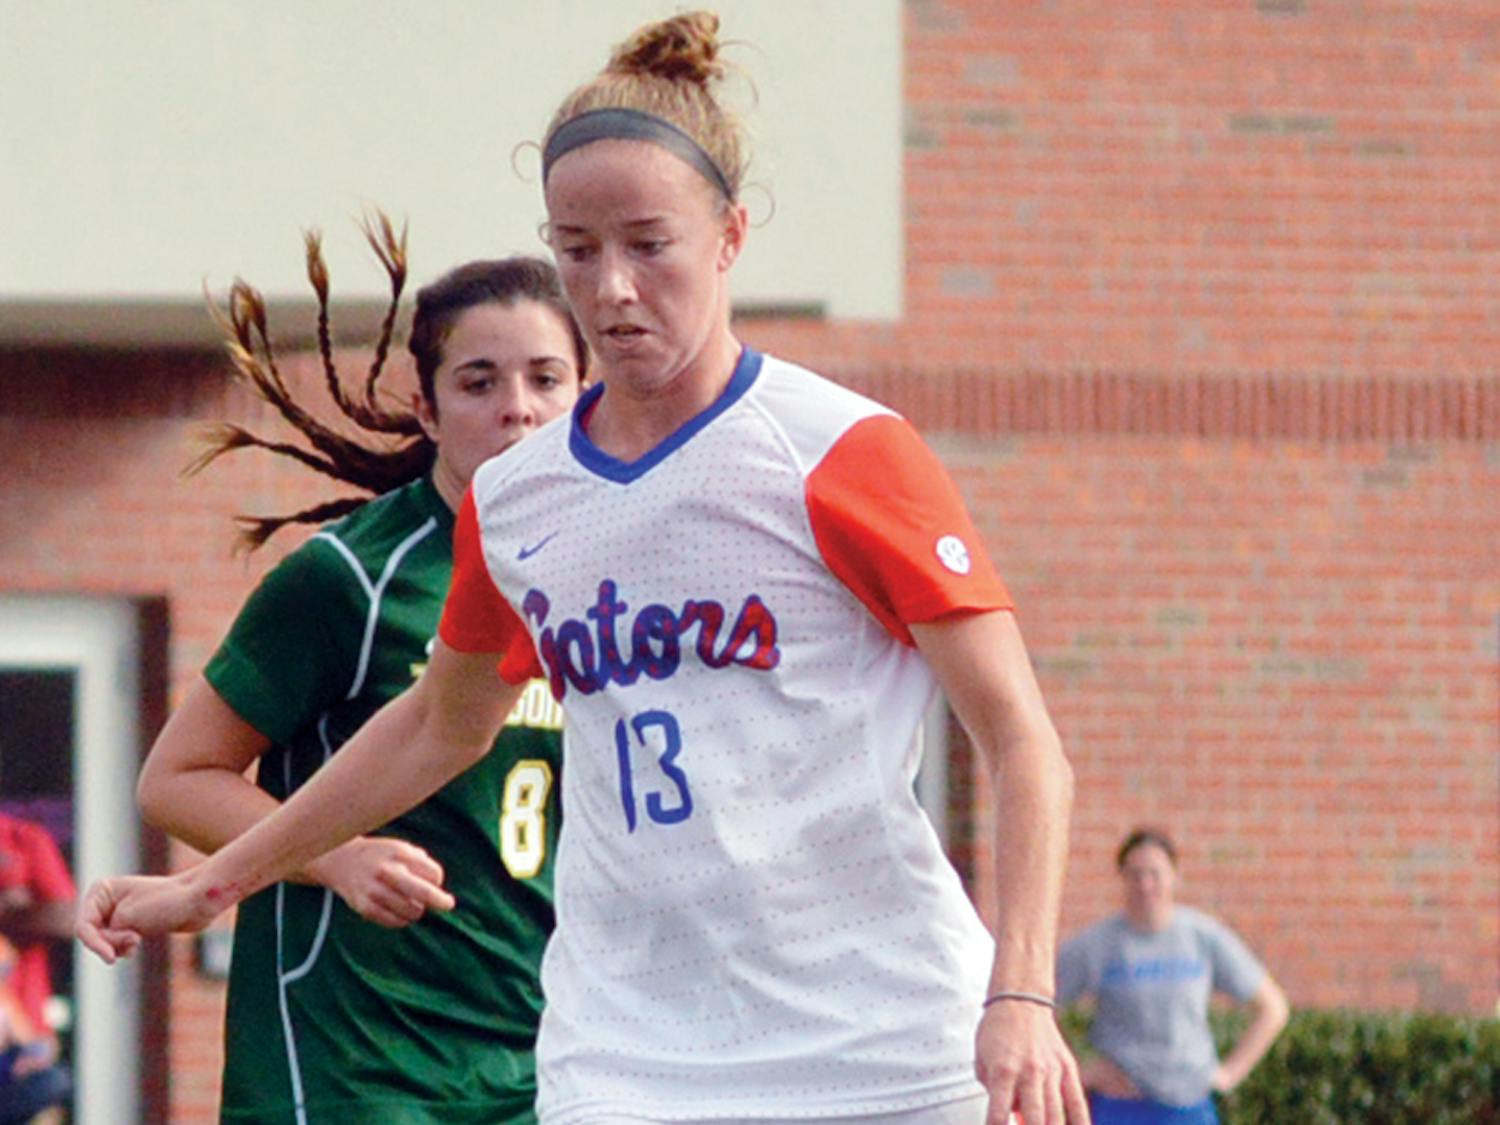 Annie Speese dribbles the ball during Florida’s 2-0 victory against Jacksonville on Saturday at home.